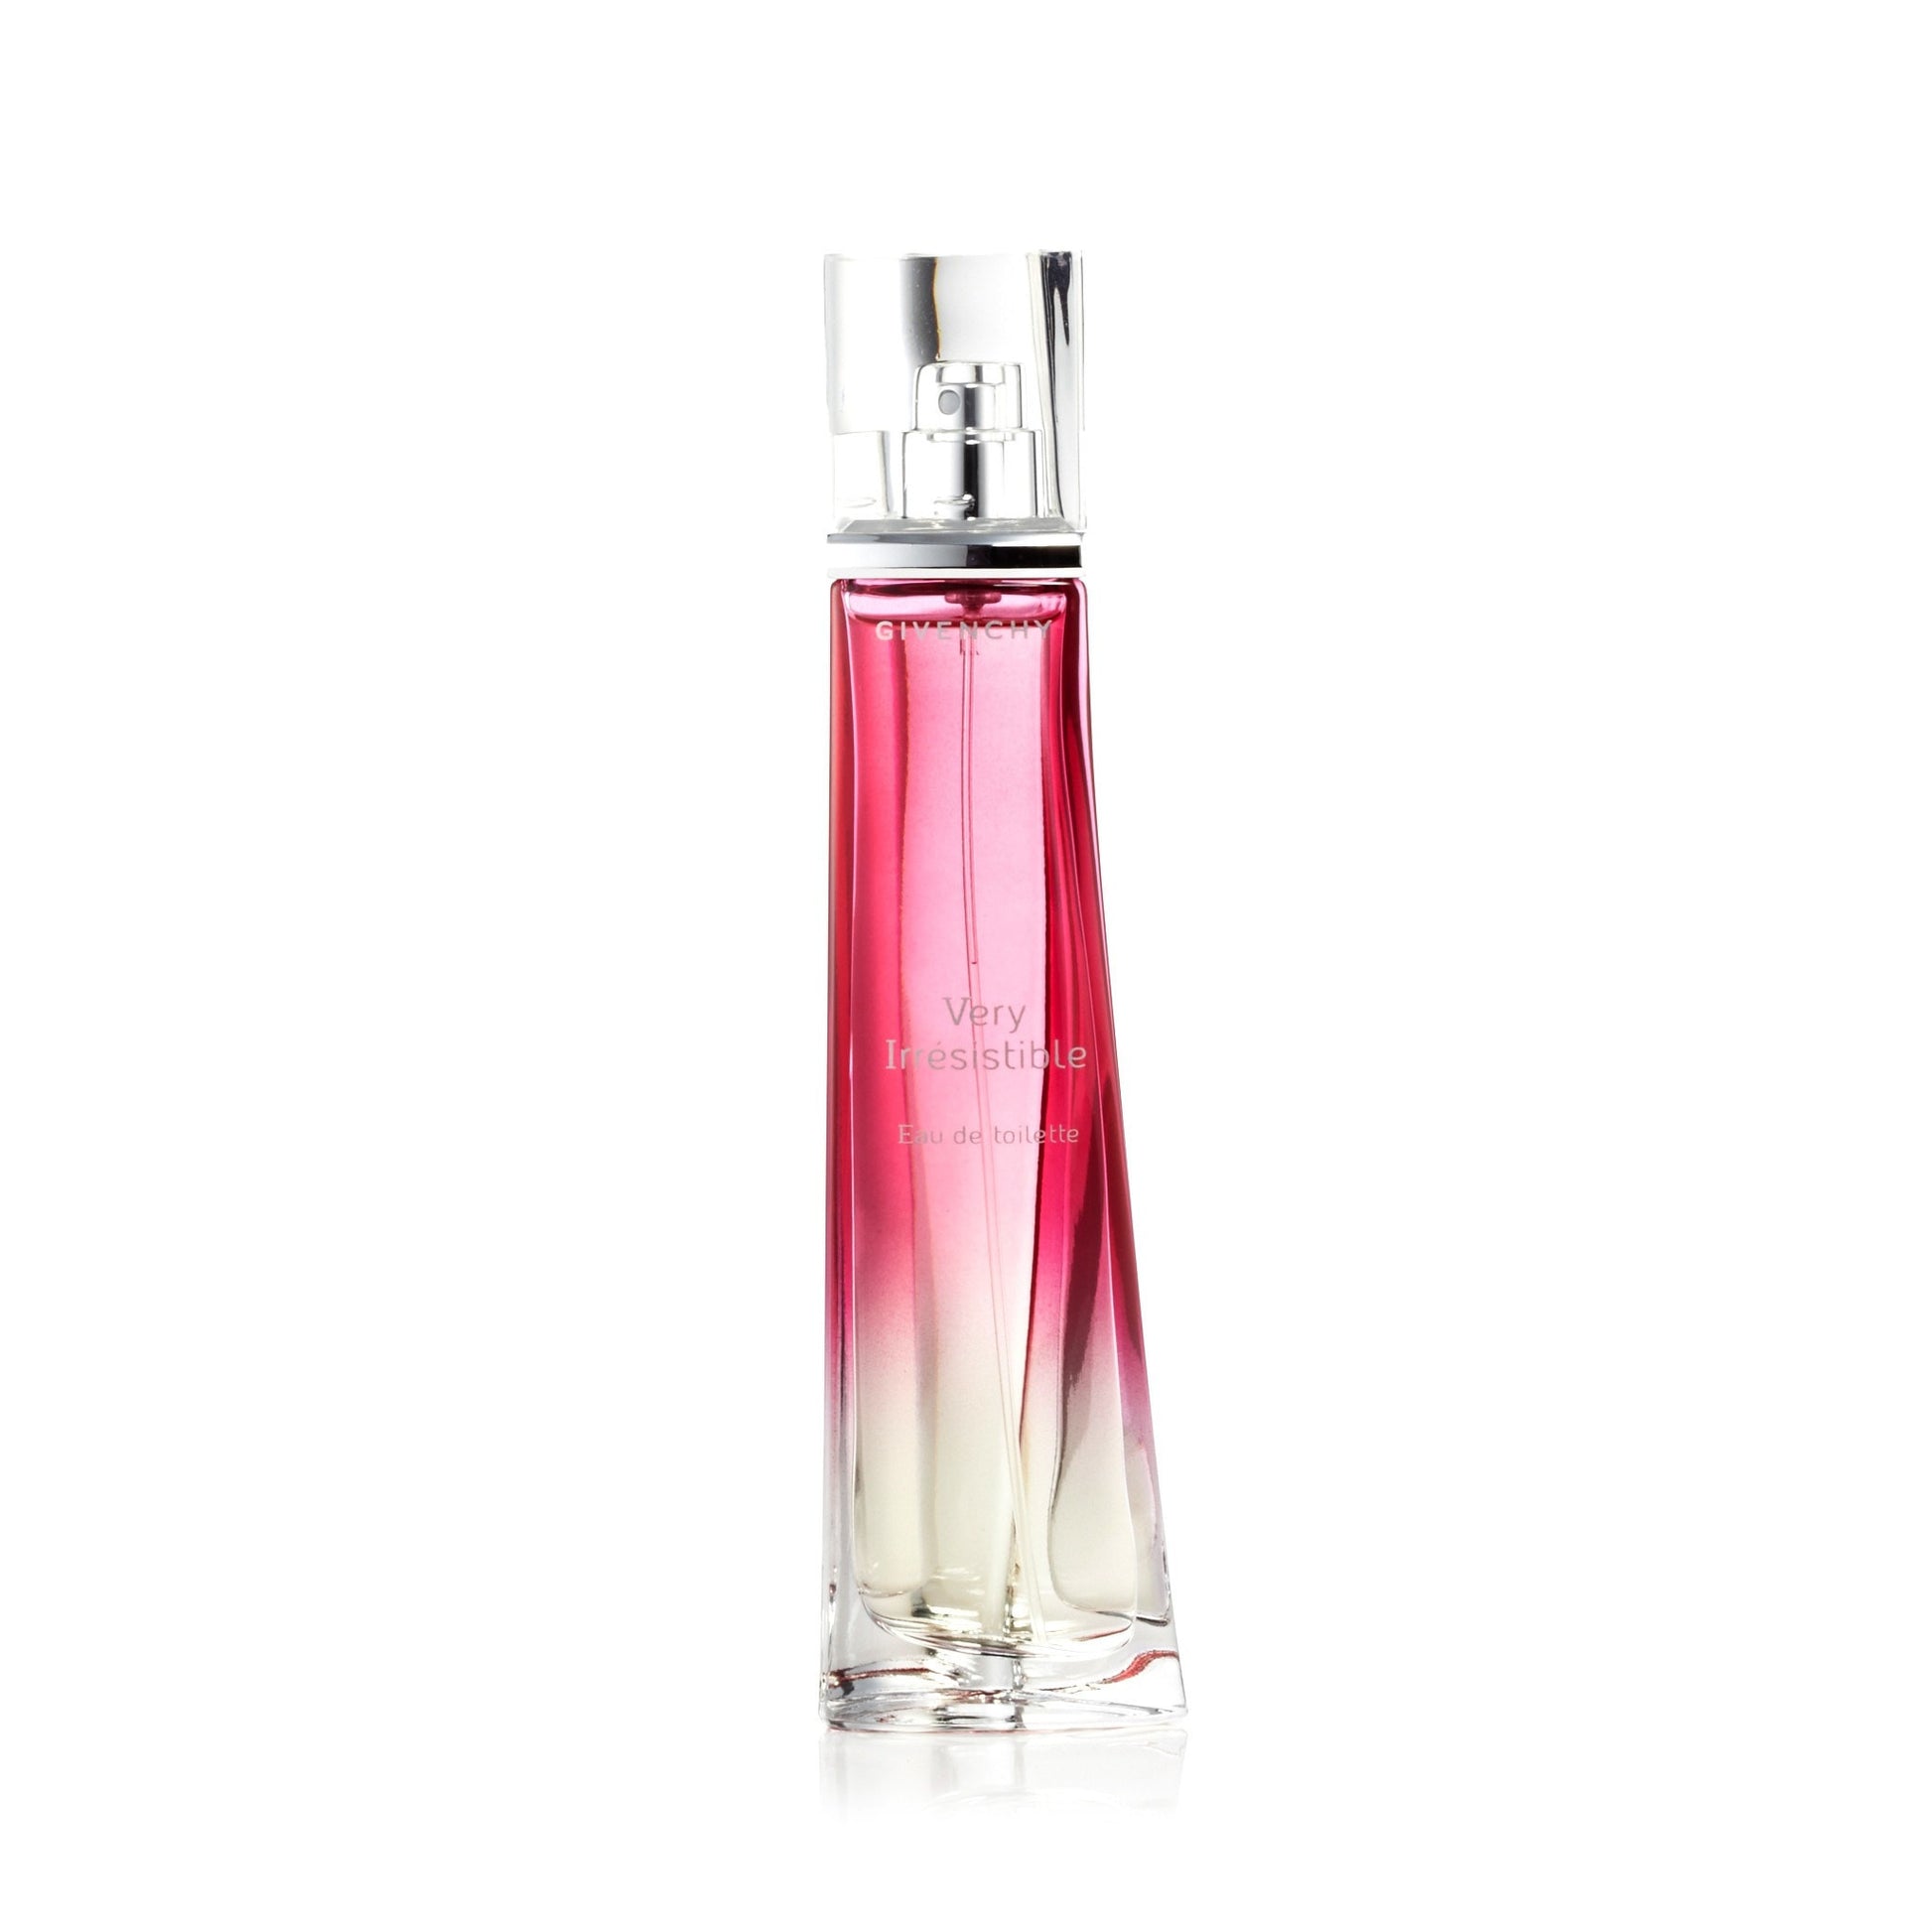 Very Irresistible Eau de Toilette Spray for Women by Givenchy 2.5 oz. Tester Click to open in modal